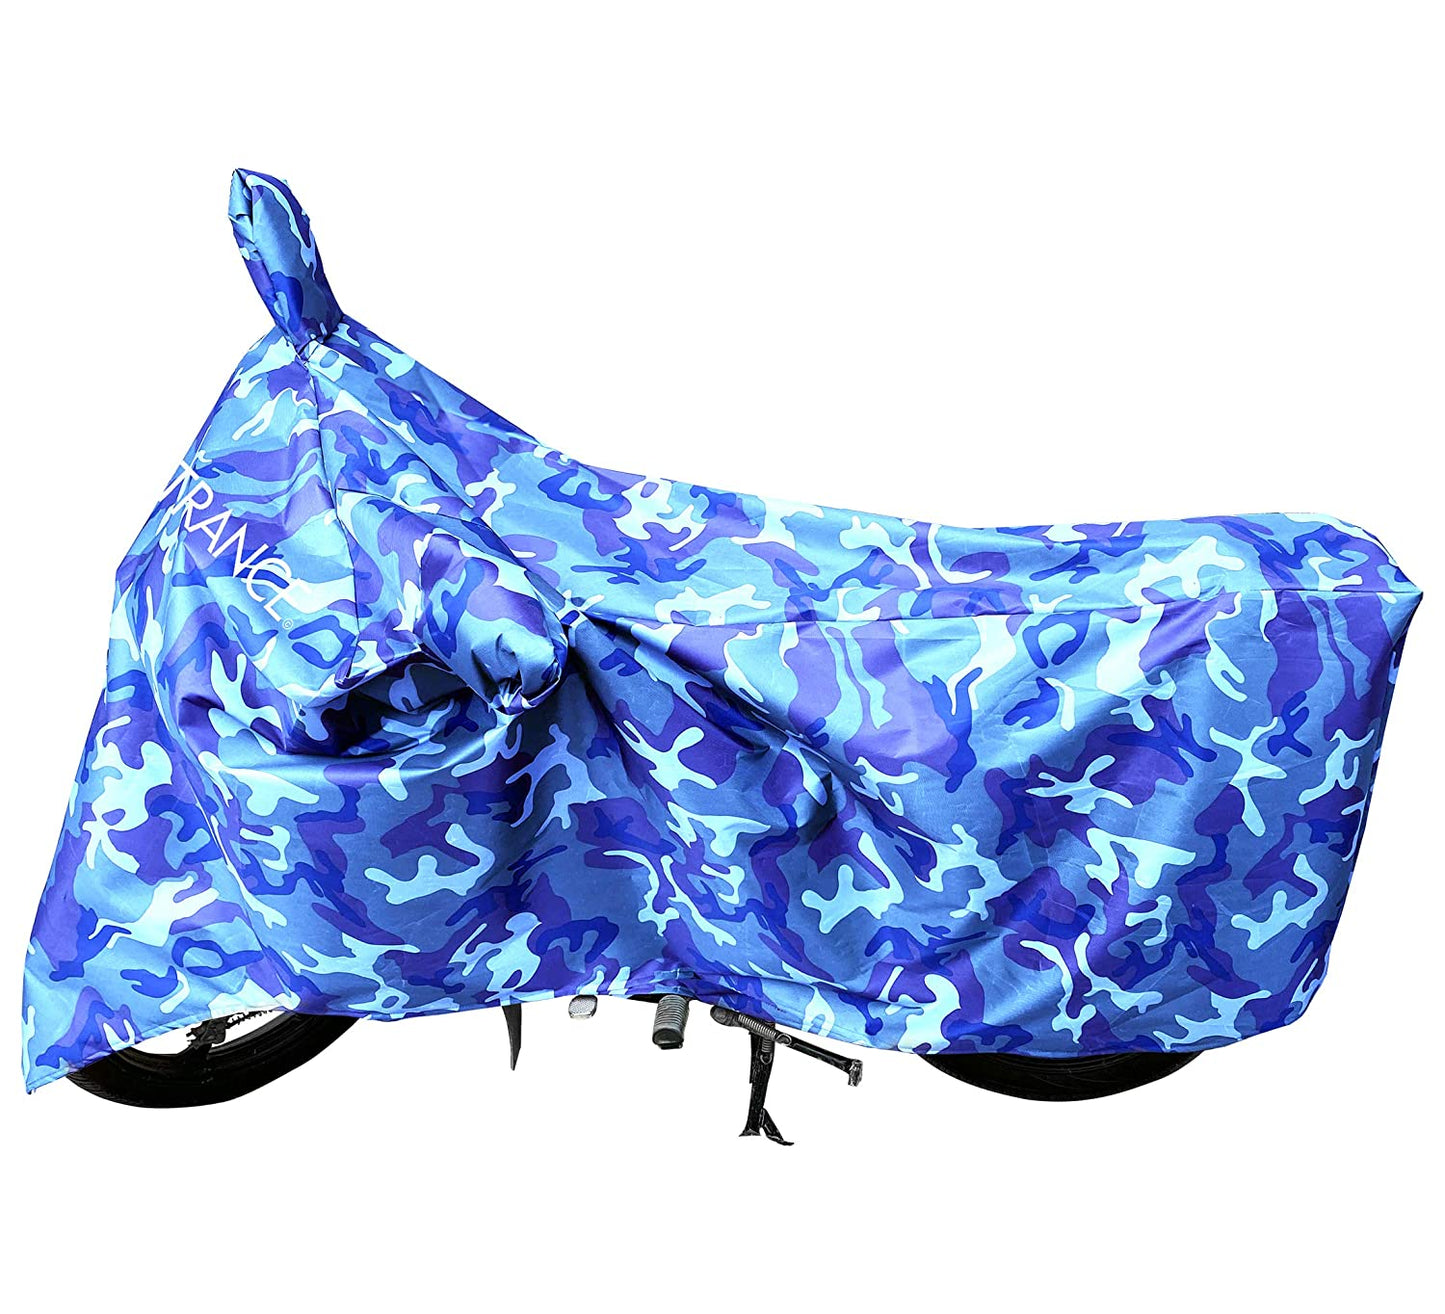 MotoTrance Jungle Bike Body Covers For Yamaha Ray Z - Interlock-Stitched Waterproof and Heat Resistant with Mirror Pockets